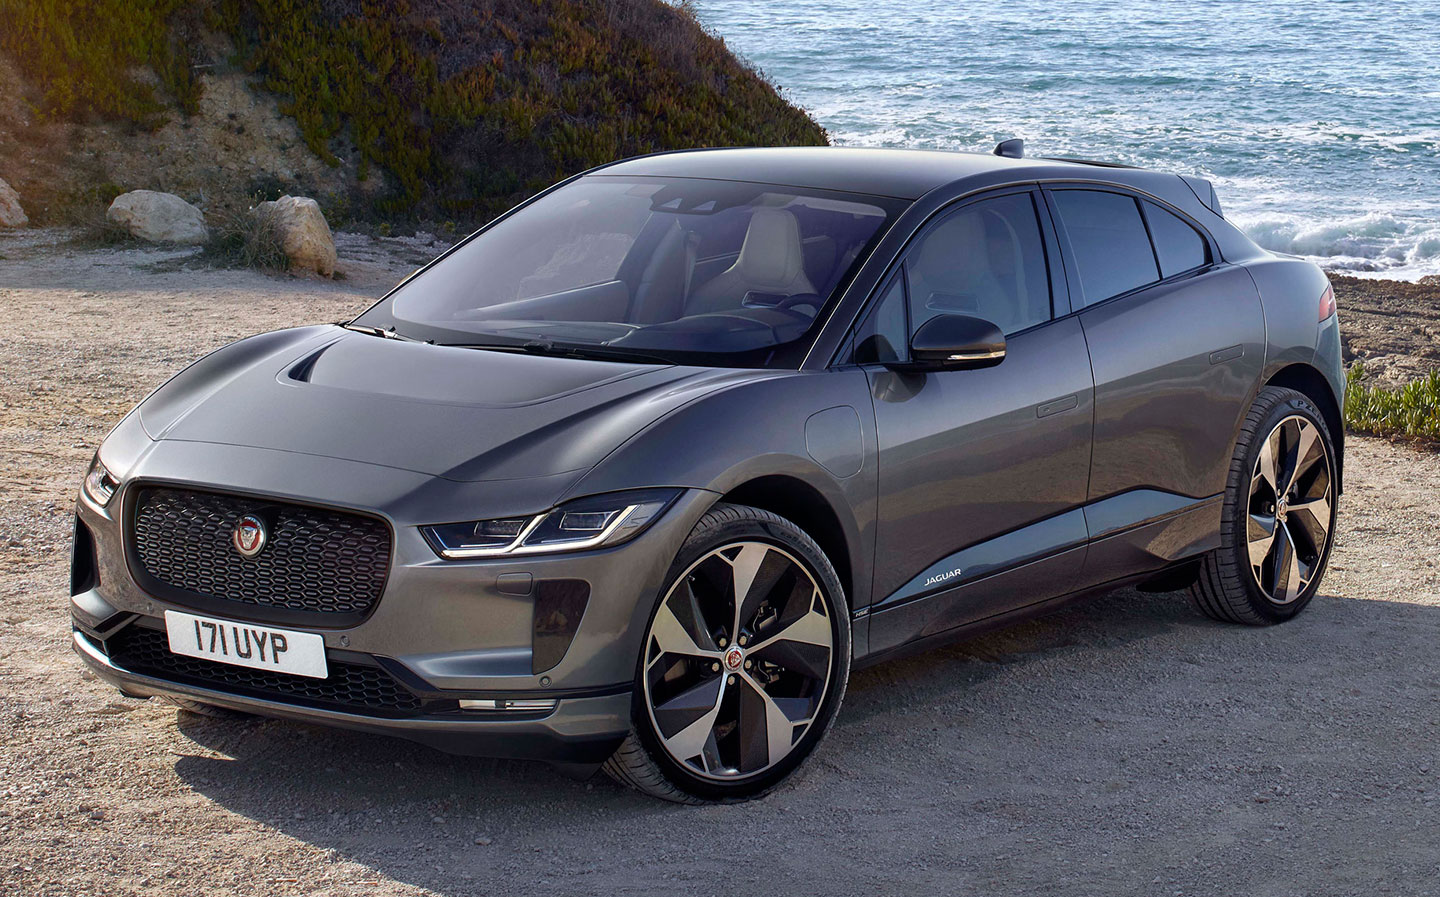 Jaguar confirms it will kill off I-Pace electric car along with petrol models in 2025 shake-up